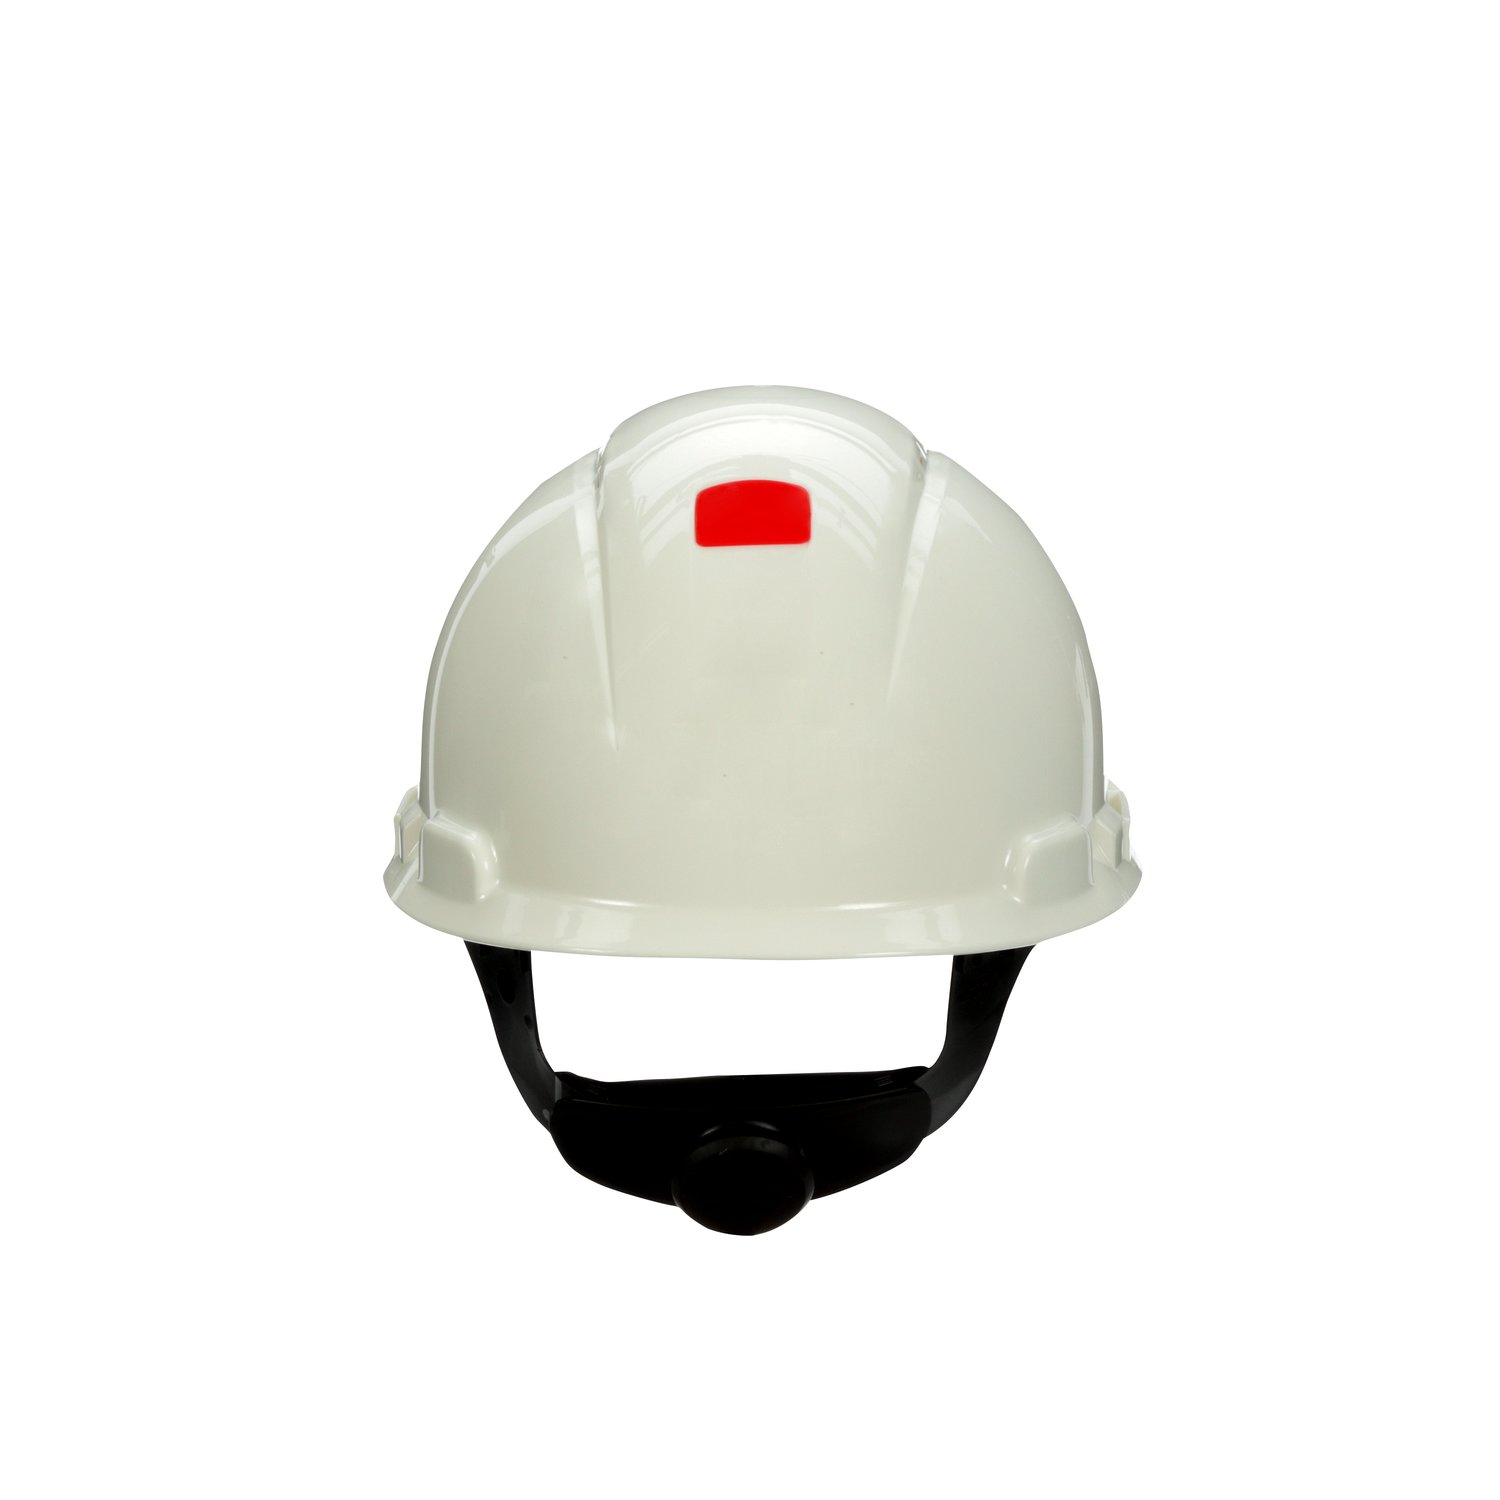 7100239982 - 3M SecureFit Hard Hat H-701SFR-UV, White, 4-Point Pressure Diffusion Ratchet Suspension, with Uvicator, 20 ea/Case